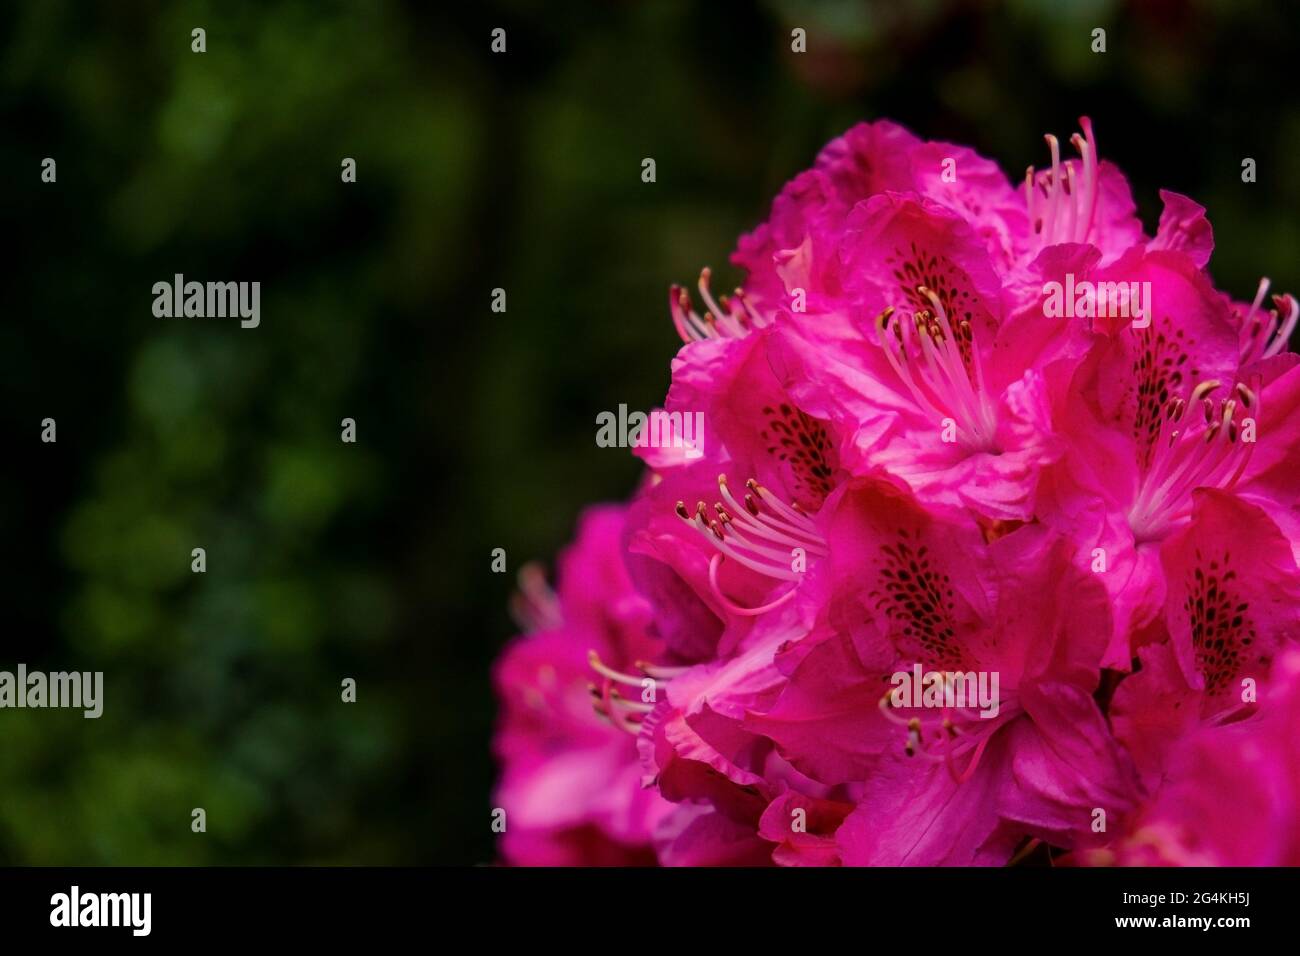 A closeup view of the flowers of a rhododendron shrub. Stock Photo